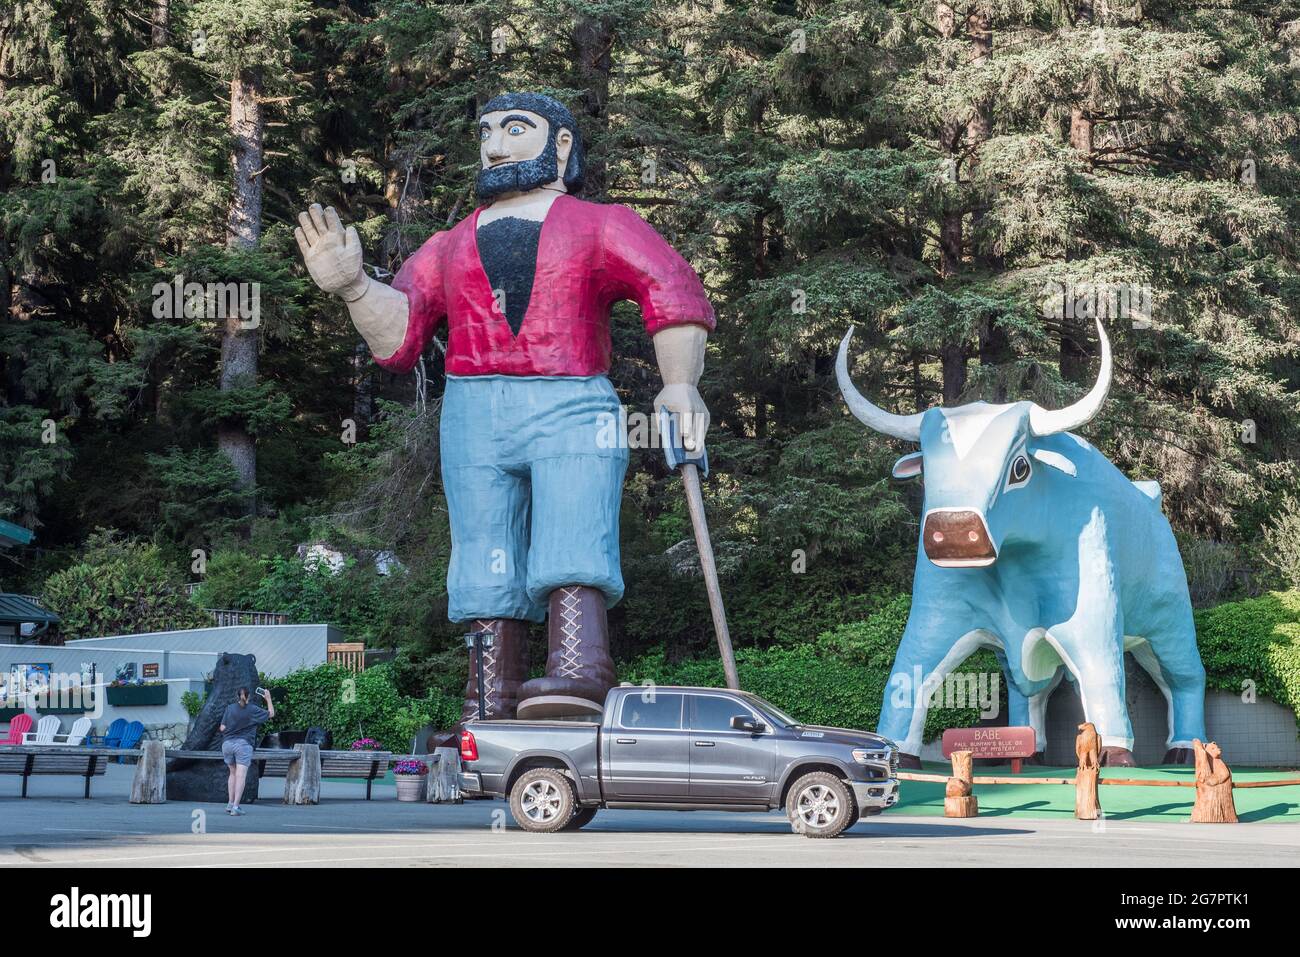 A giant statue of Paul Bunyan and Babe the blue ox at trees of mystery, a roadside tourist attraction in Klamath, Northern California. Stock Photo